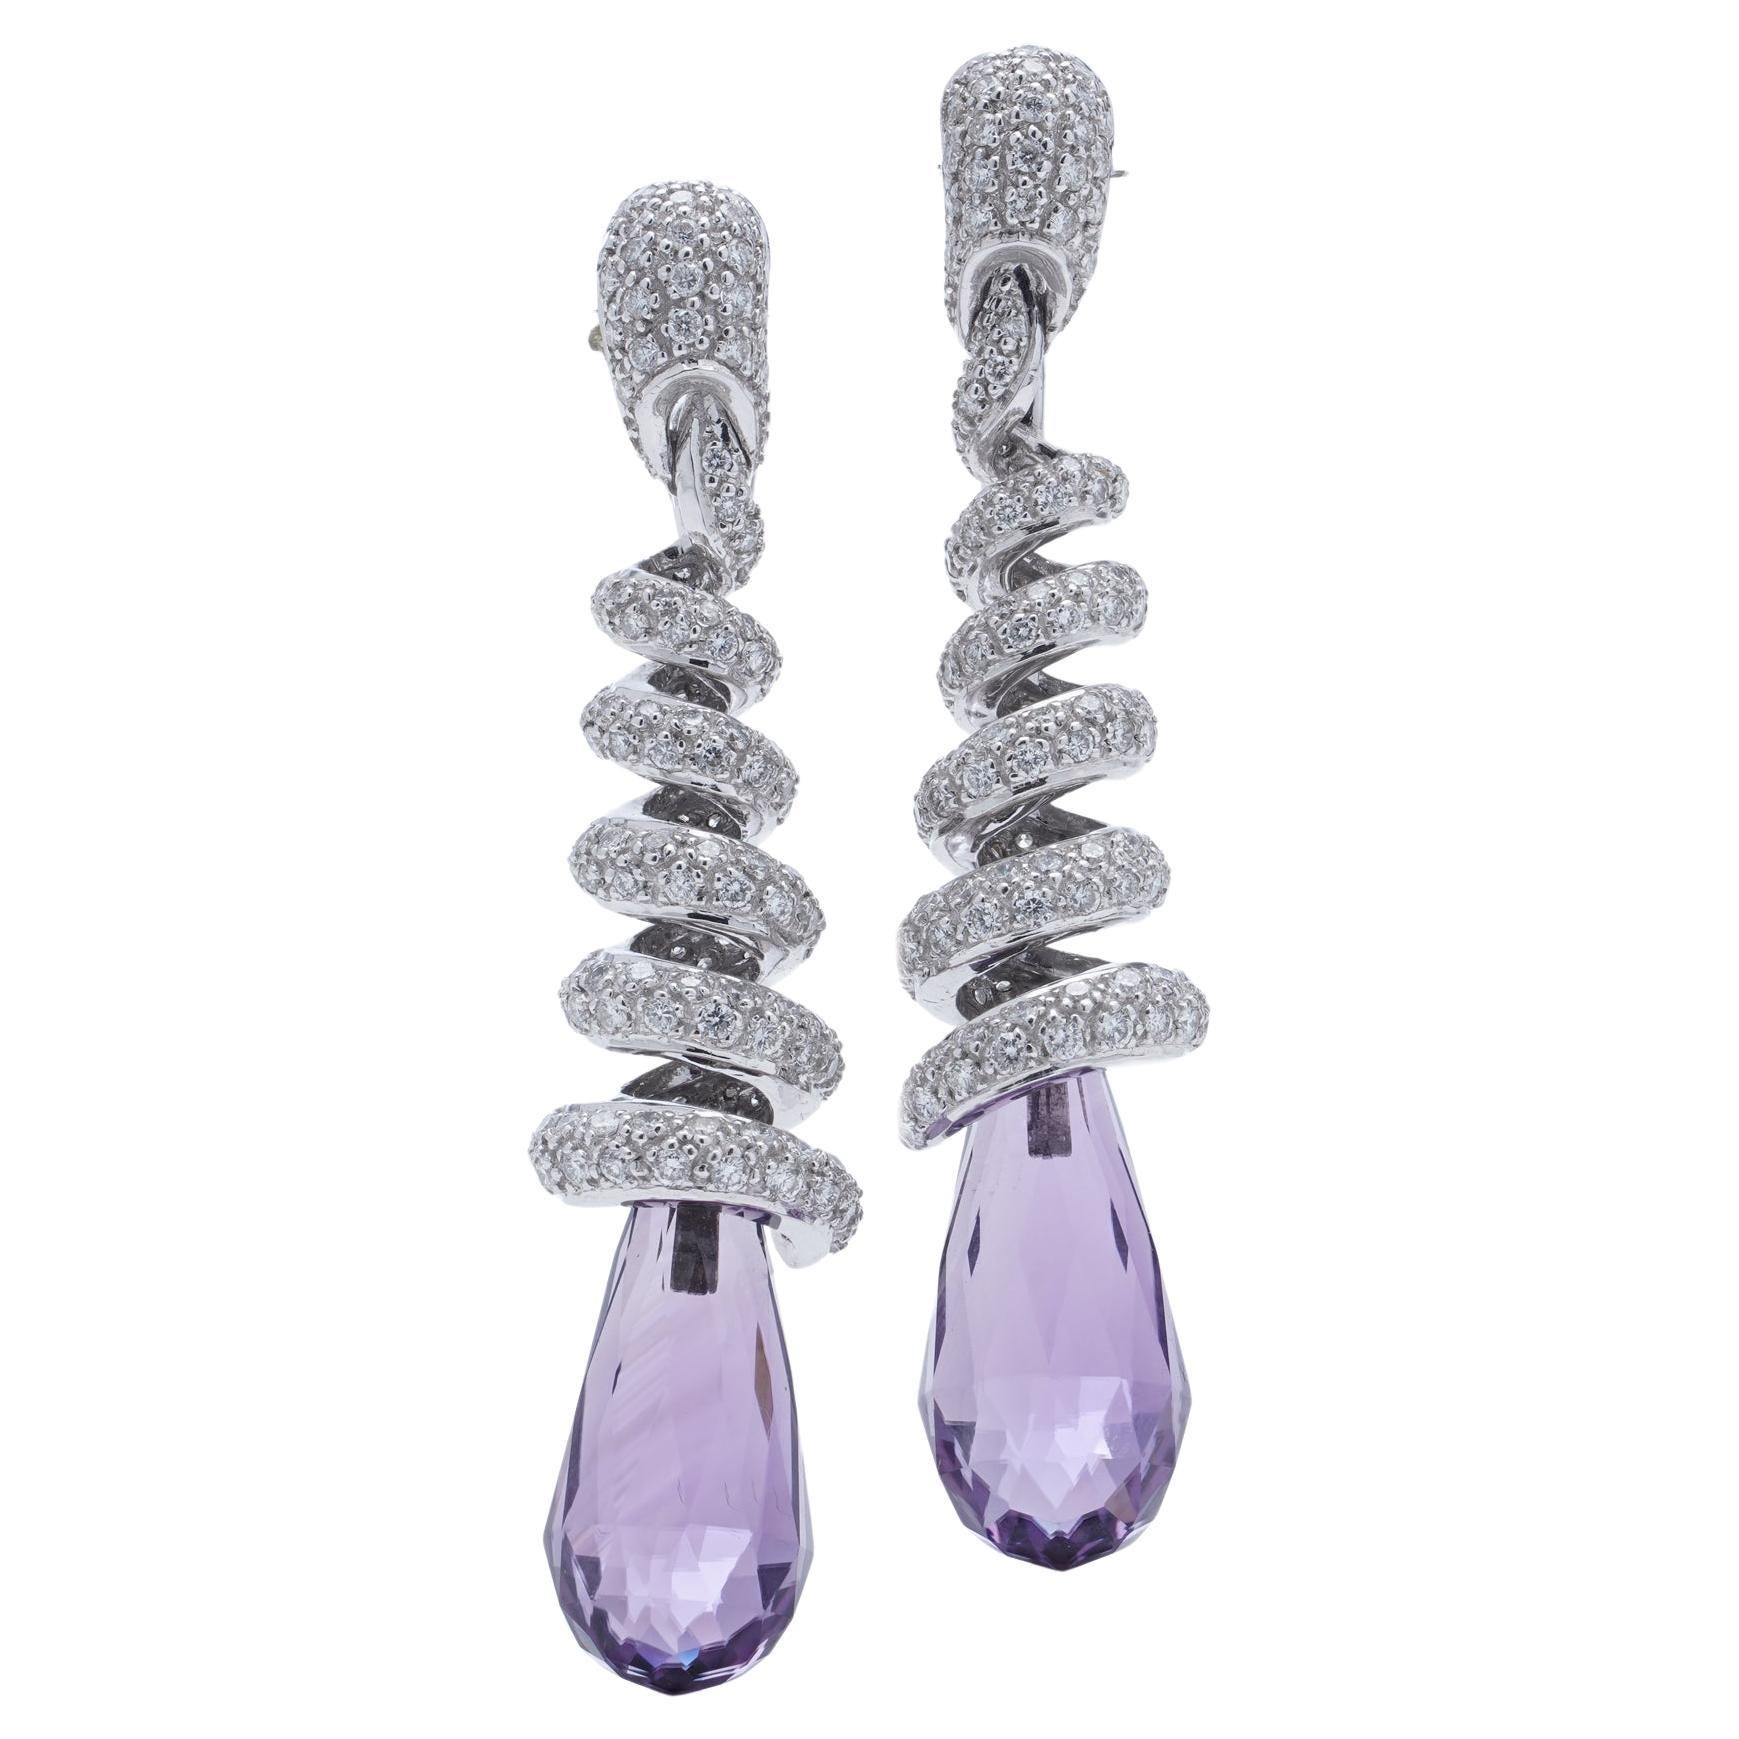 18 Karat, White Gold Dangle Pair of Earrings with Amethyst and Diamonds